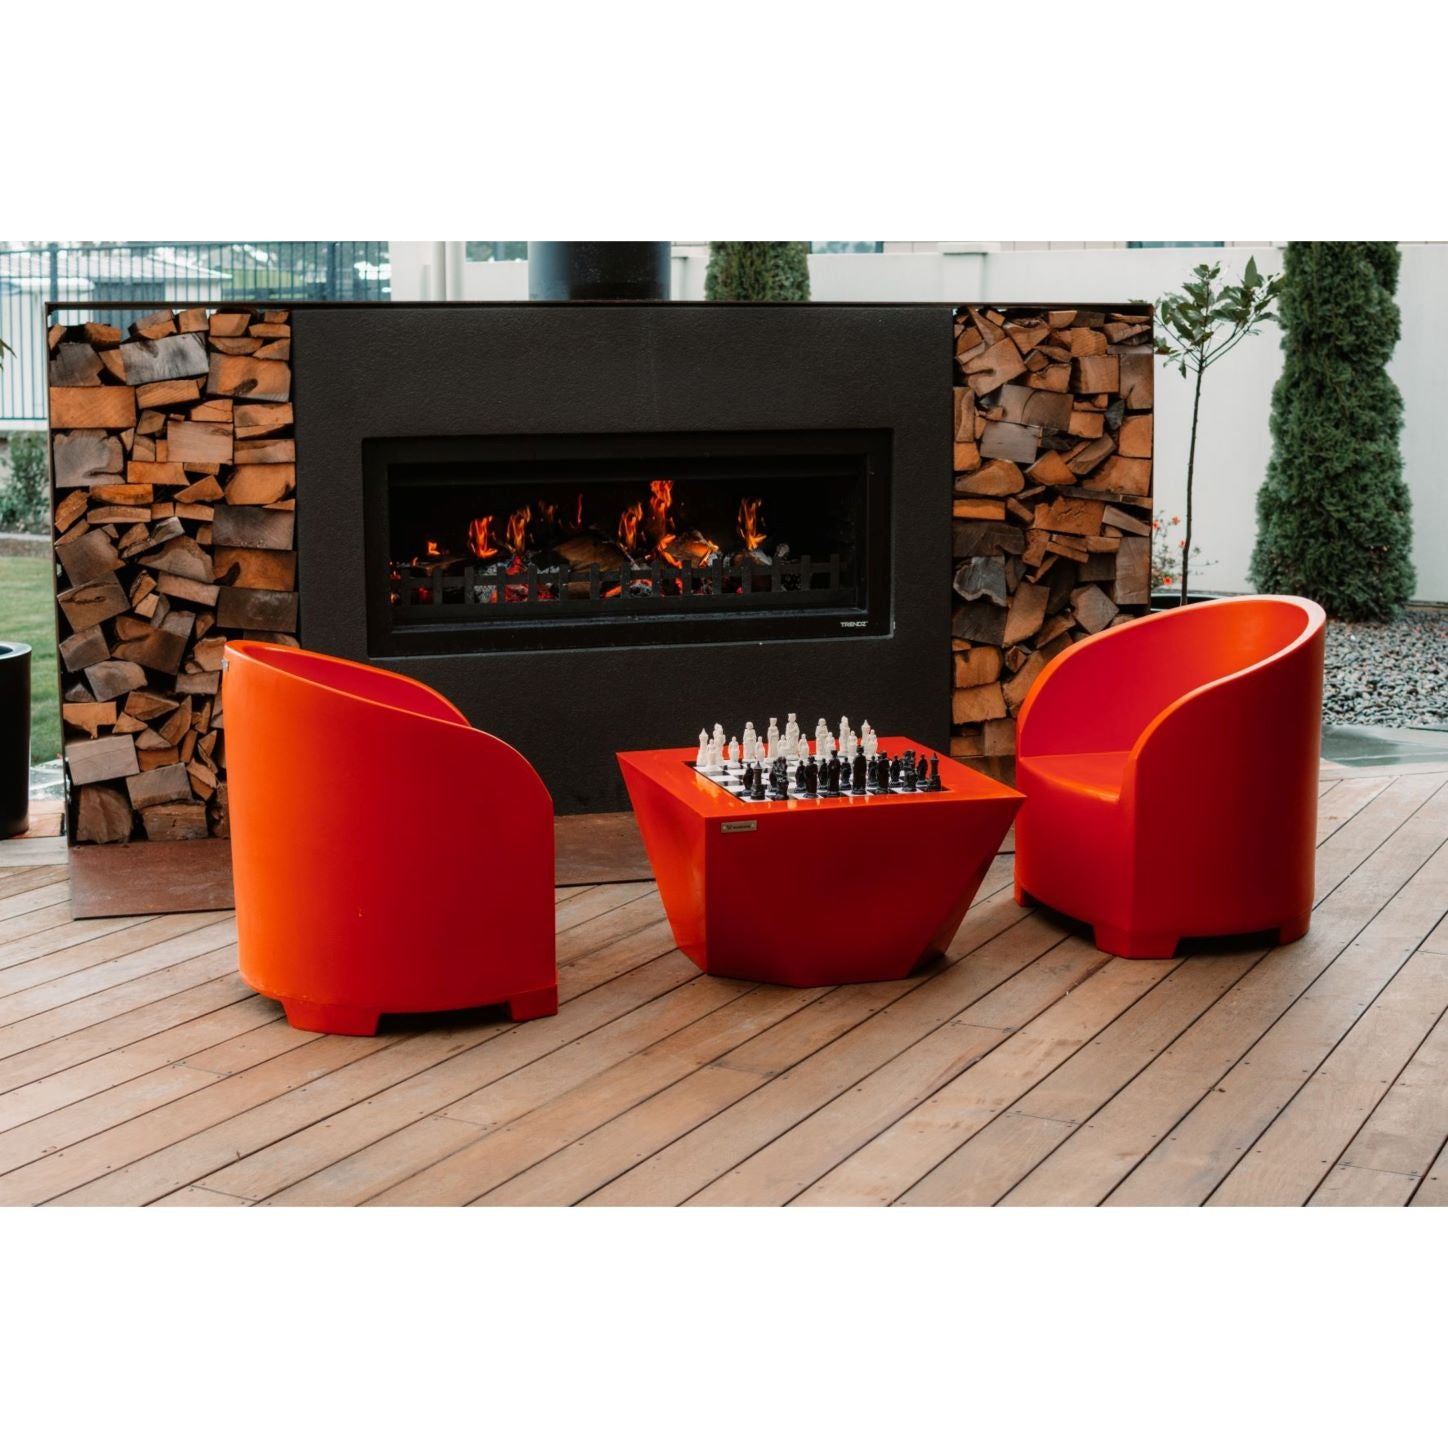 Orange Modscene outdoor furniture on a patio in front of a Trendz Outdoors fireplace.